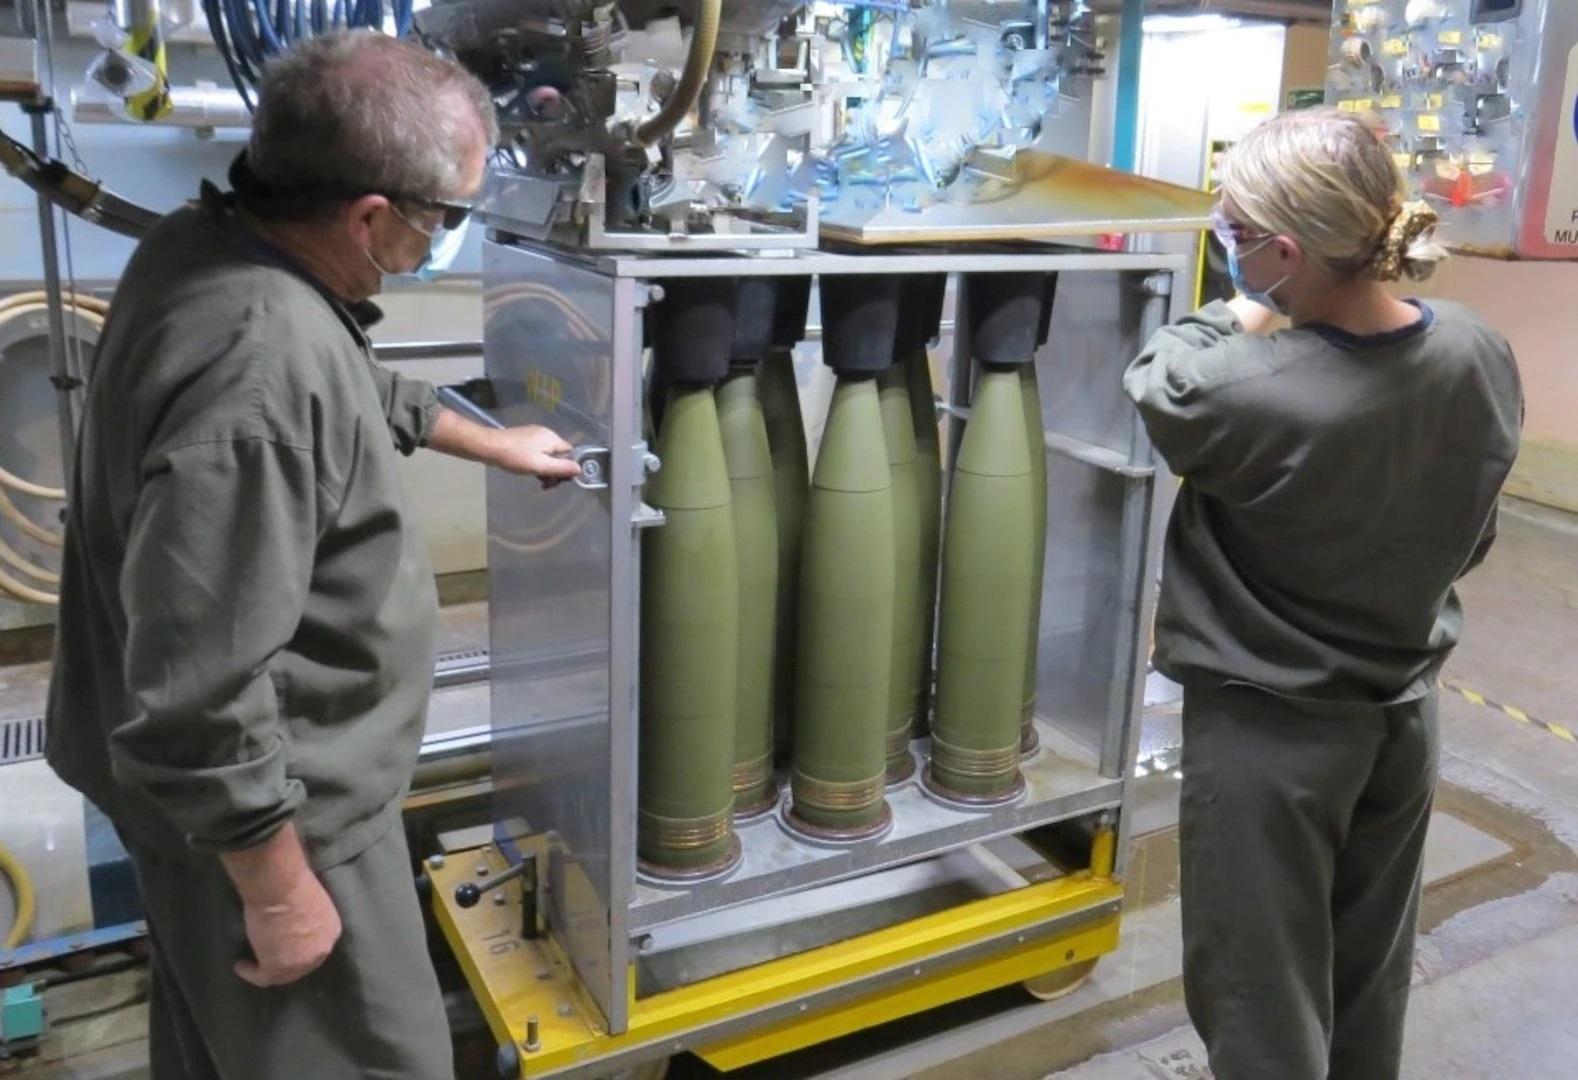 Thales Australia employees fill M795 155mm high-explosive projectiles at the Benalla Munitions Manufacturing Plant in Victoria, Australia.